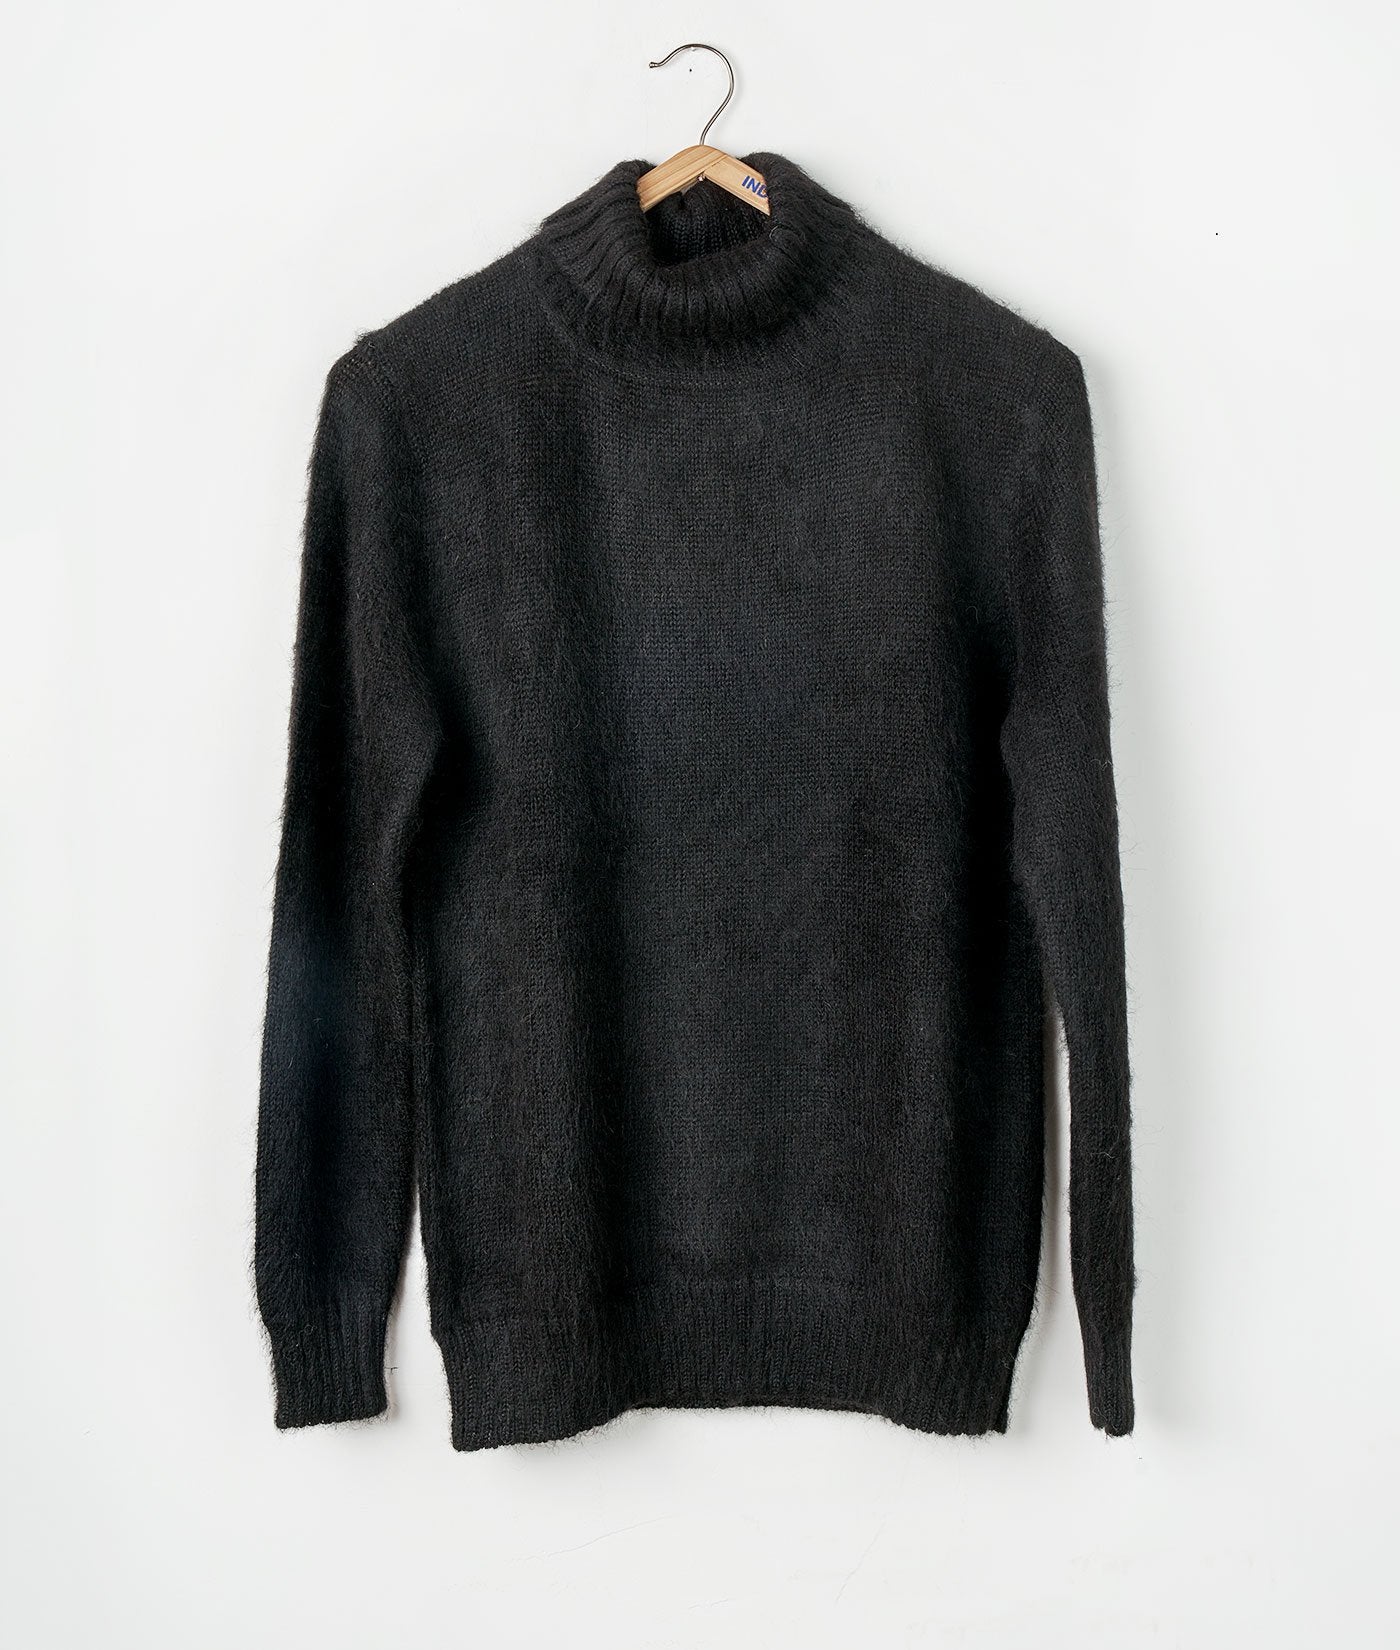 Industry of All Nations Alpaca Turtleneck Knit Sweater